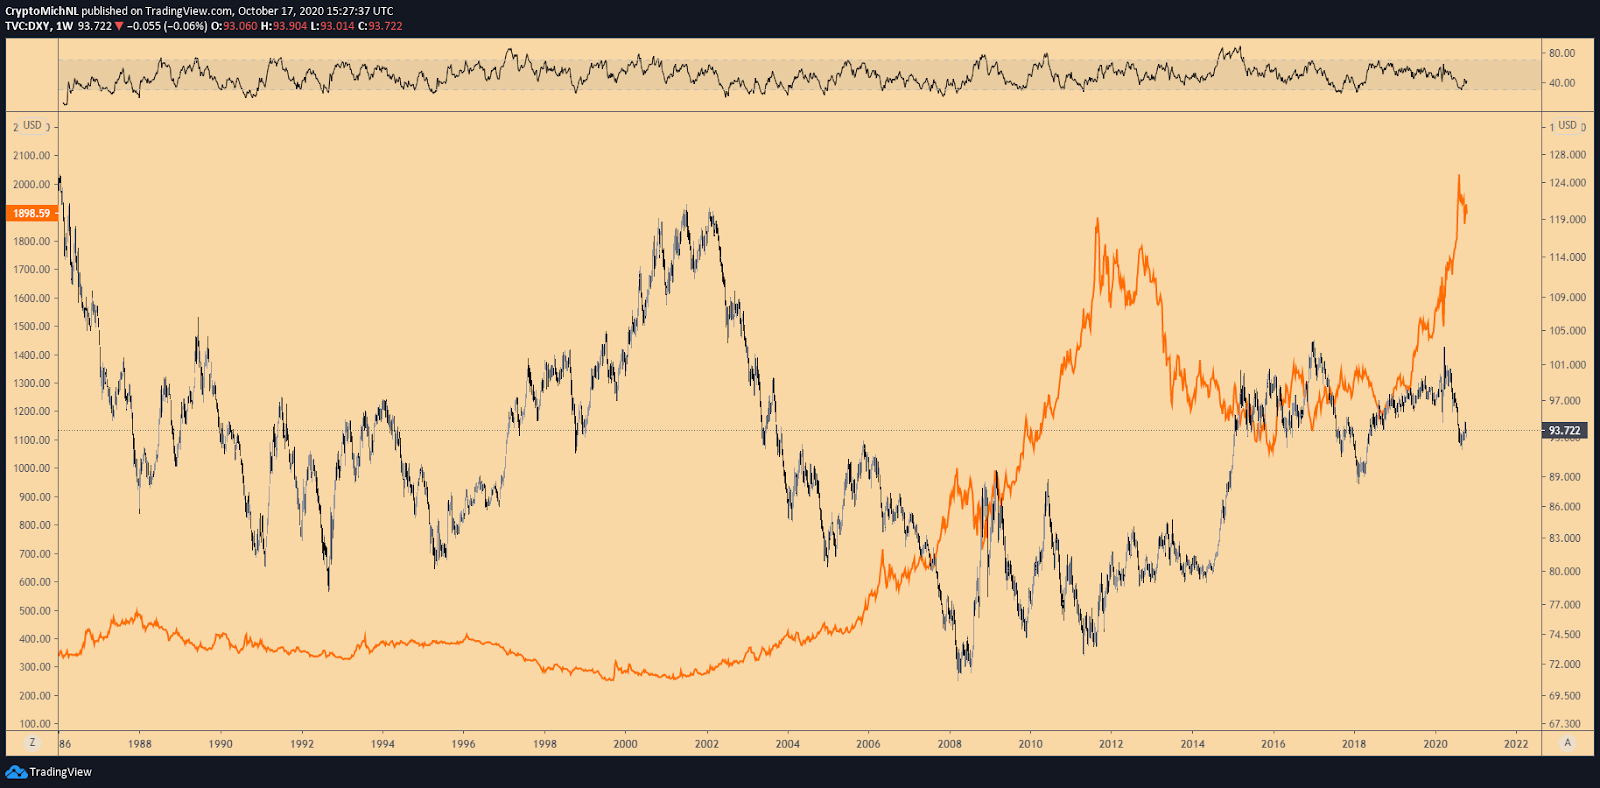 DXY vs. Gold 1-week chart. Source: TradingView